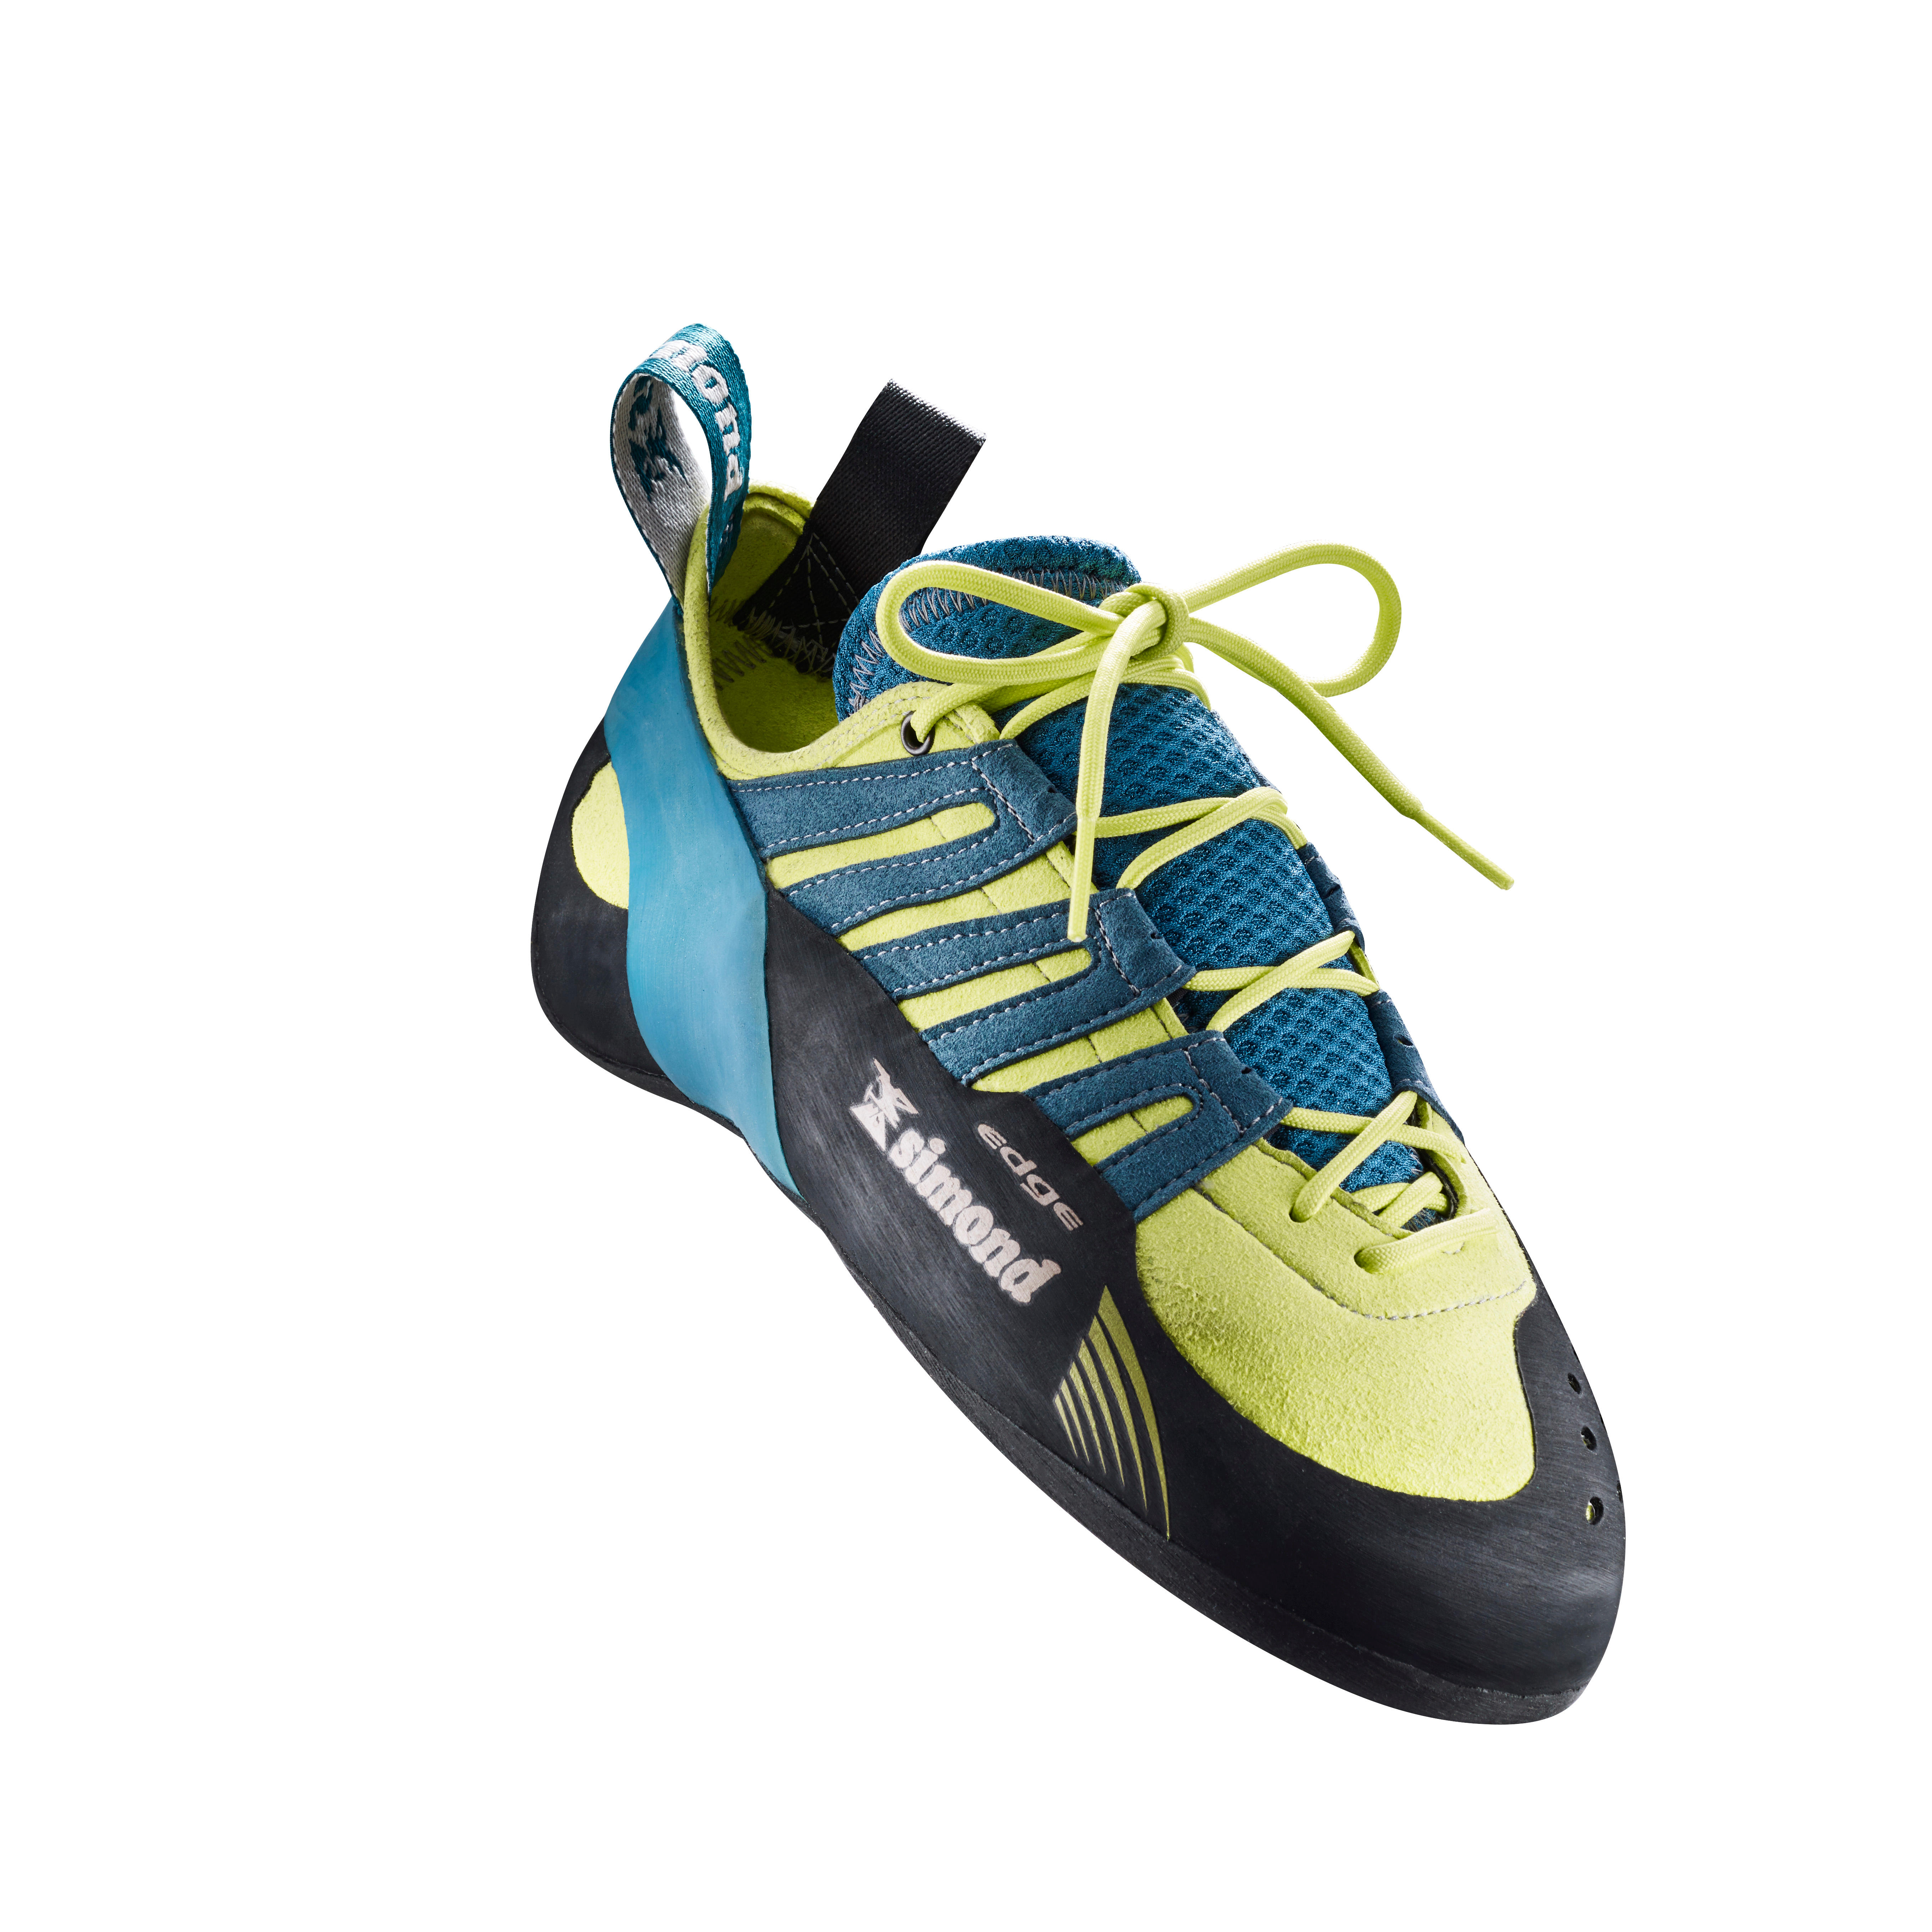 decathlon climbing shoes review